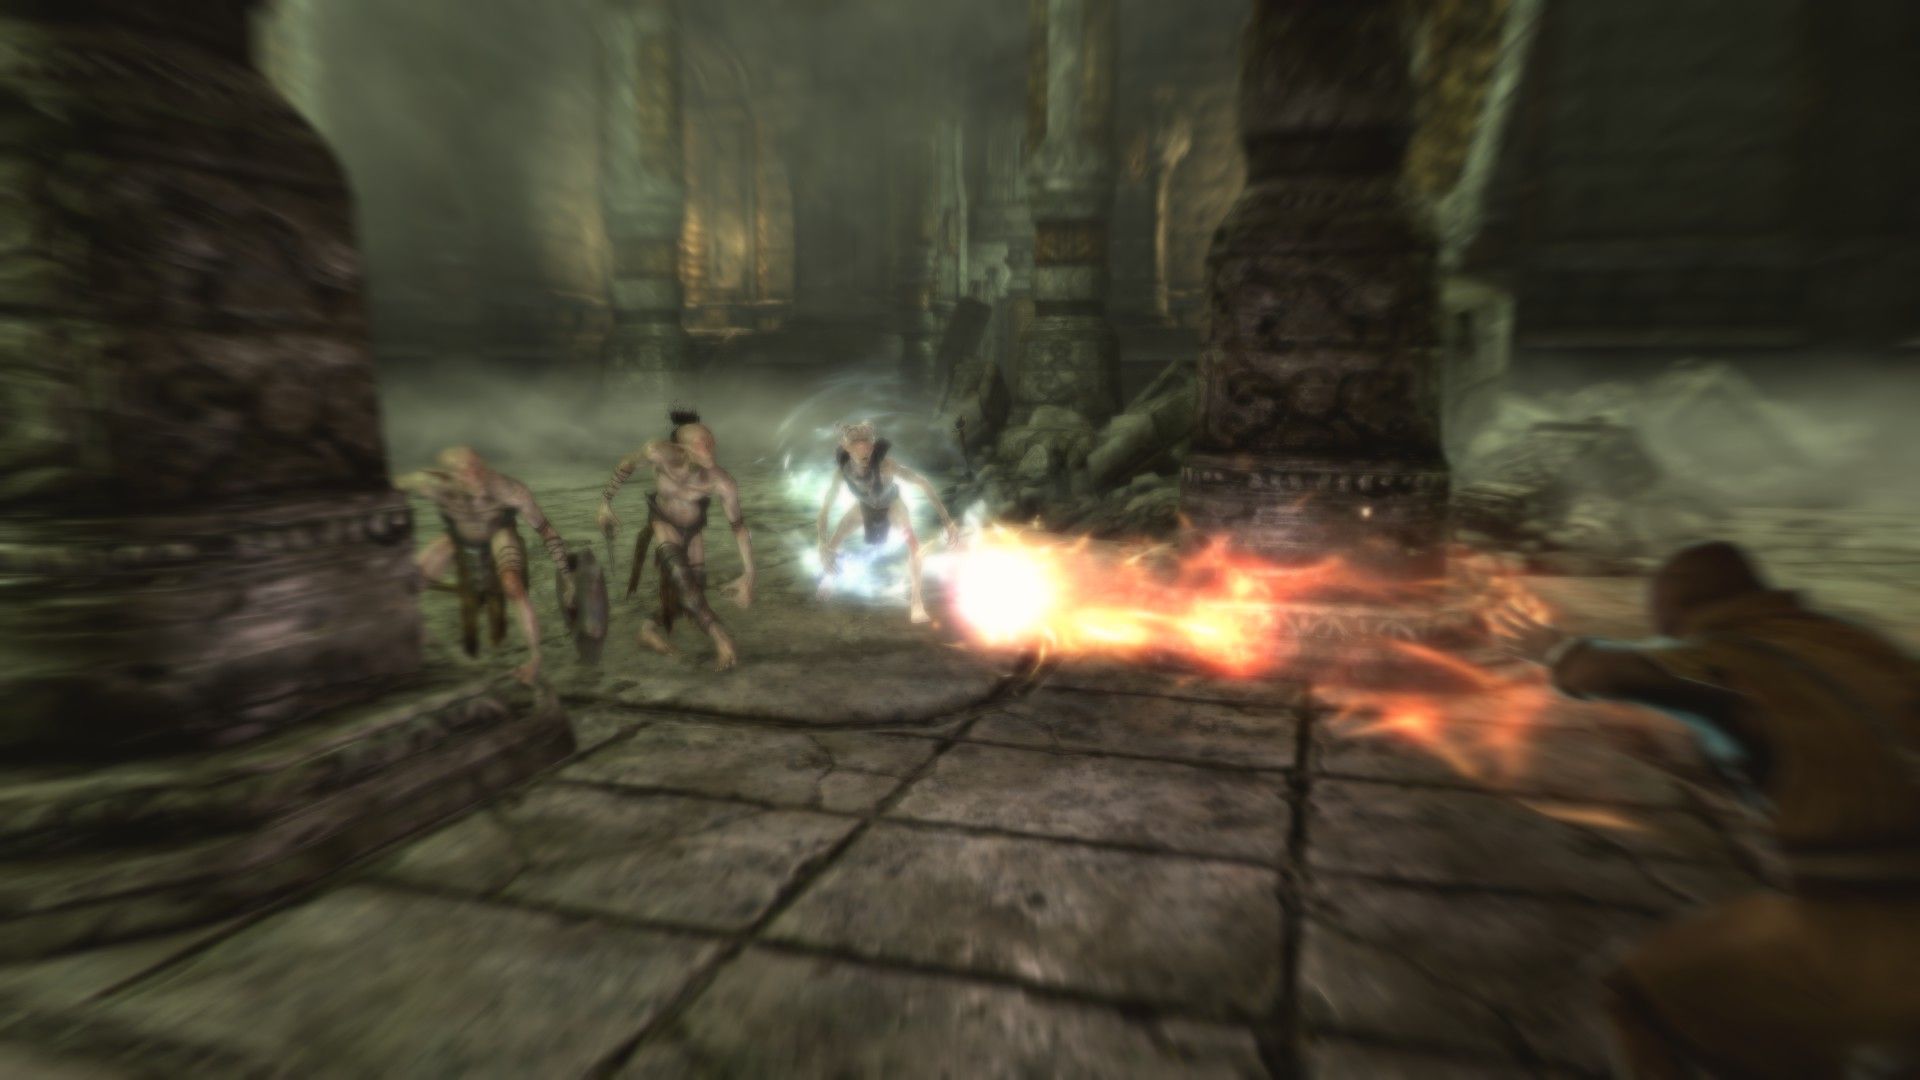 A mage flings a fireball at encroaching enemies in a stone room